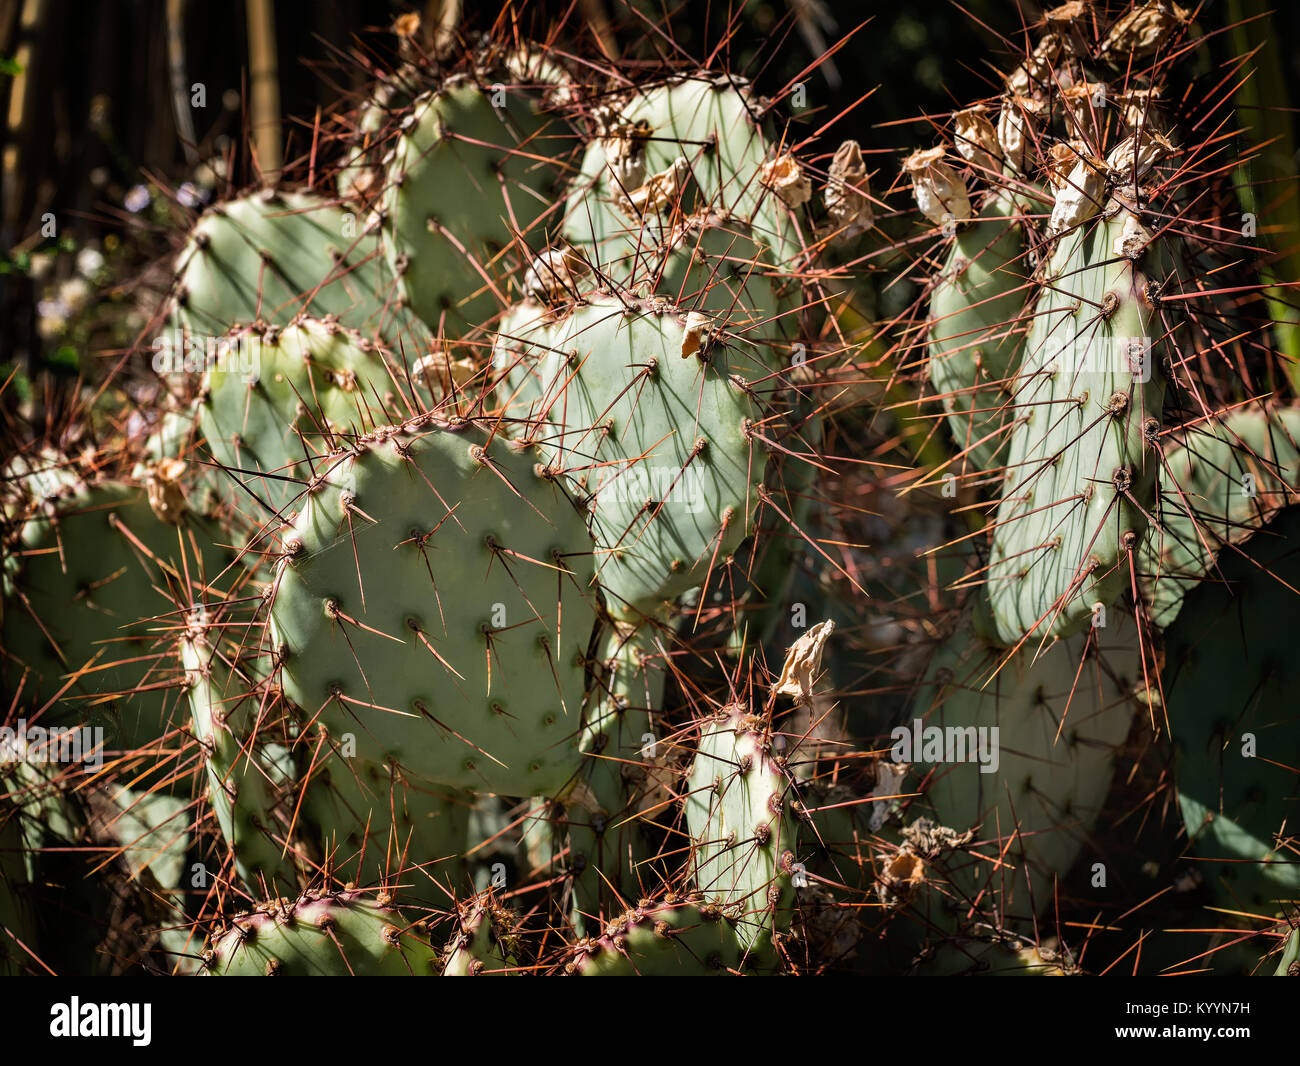 Opuntia cacti with buds and many spines Stock Photo